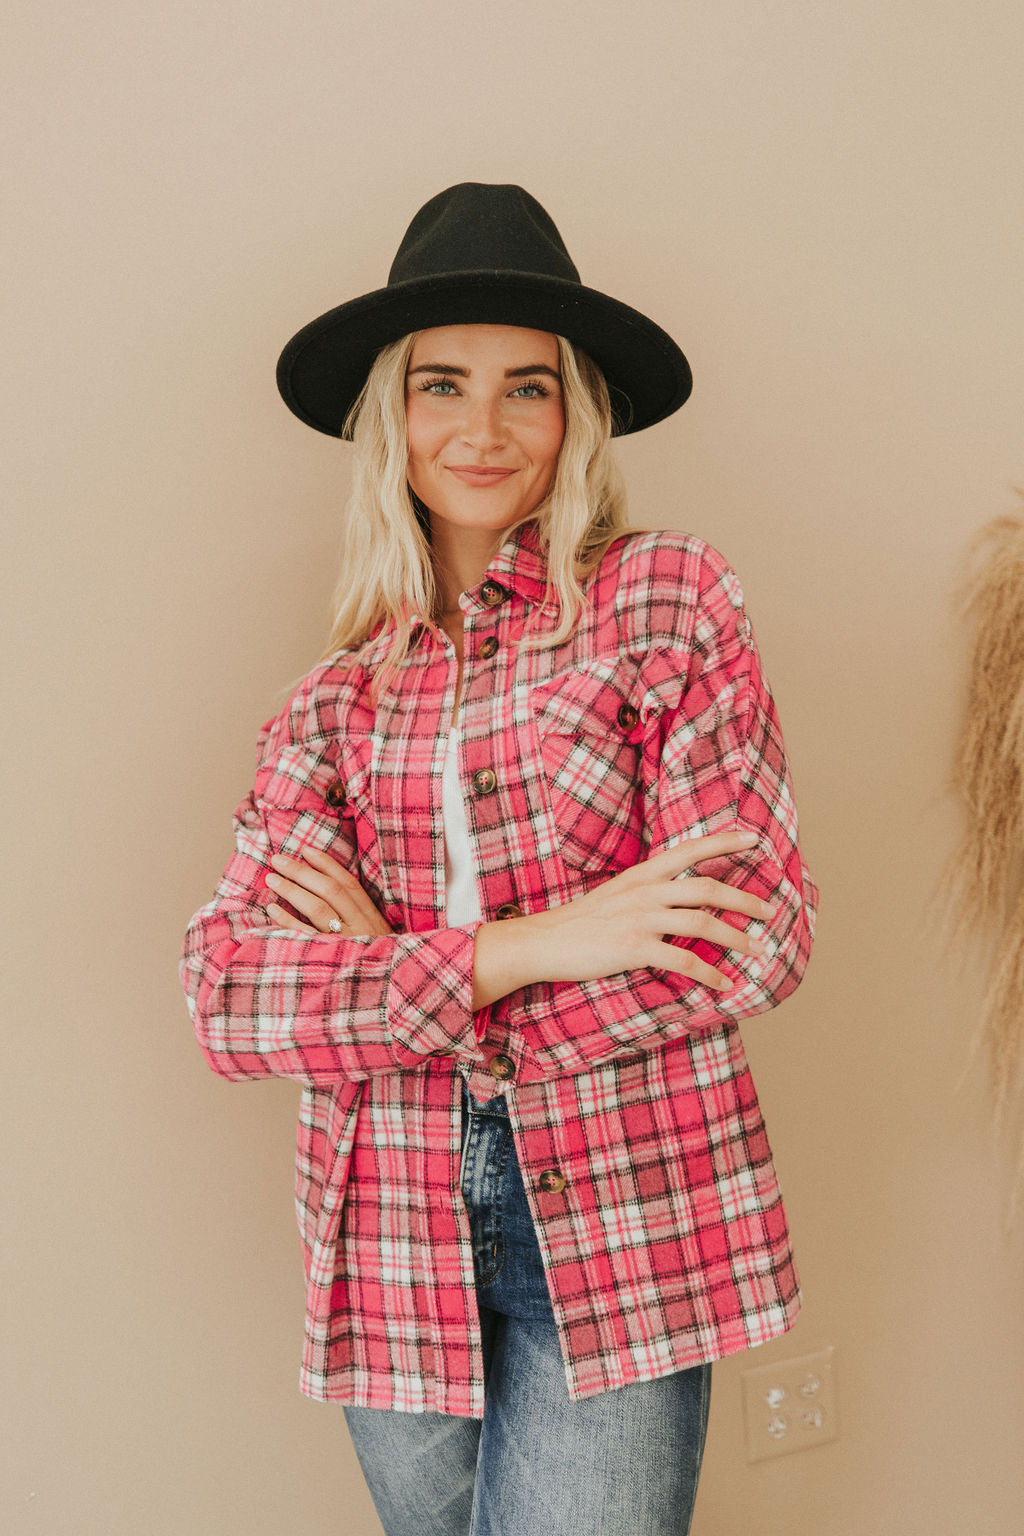 Near To Your Heart Plaid Top - Mulberry Skies